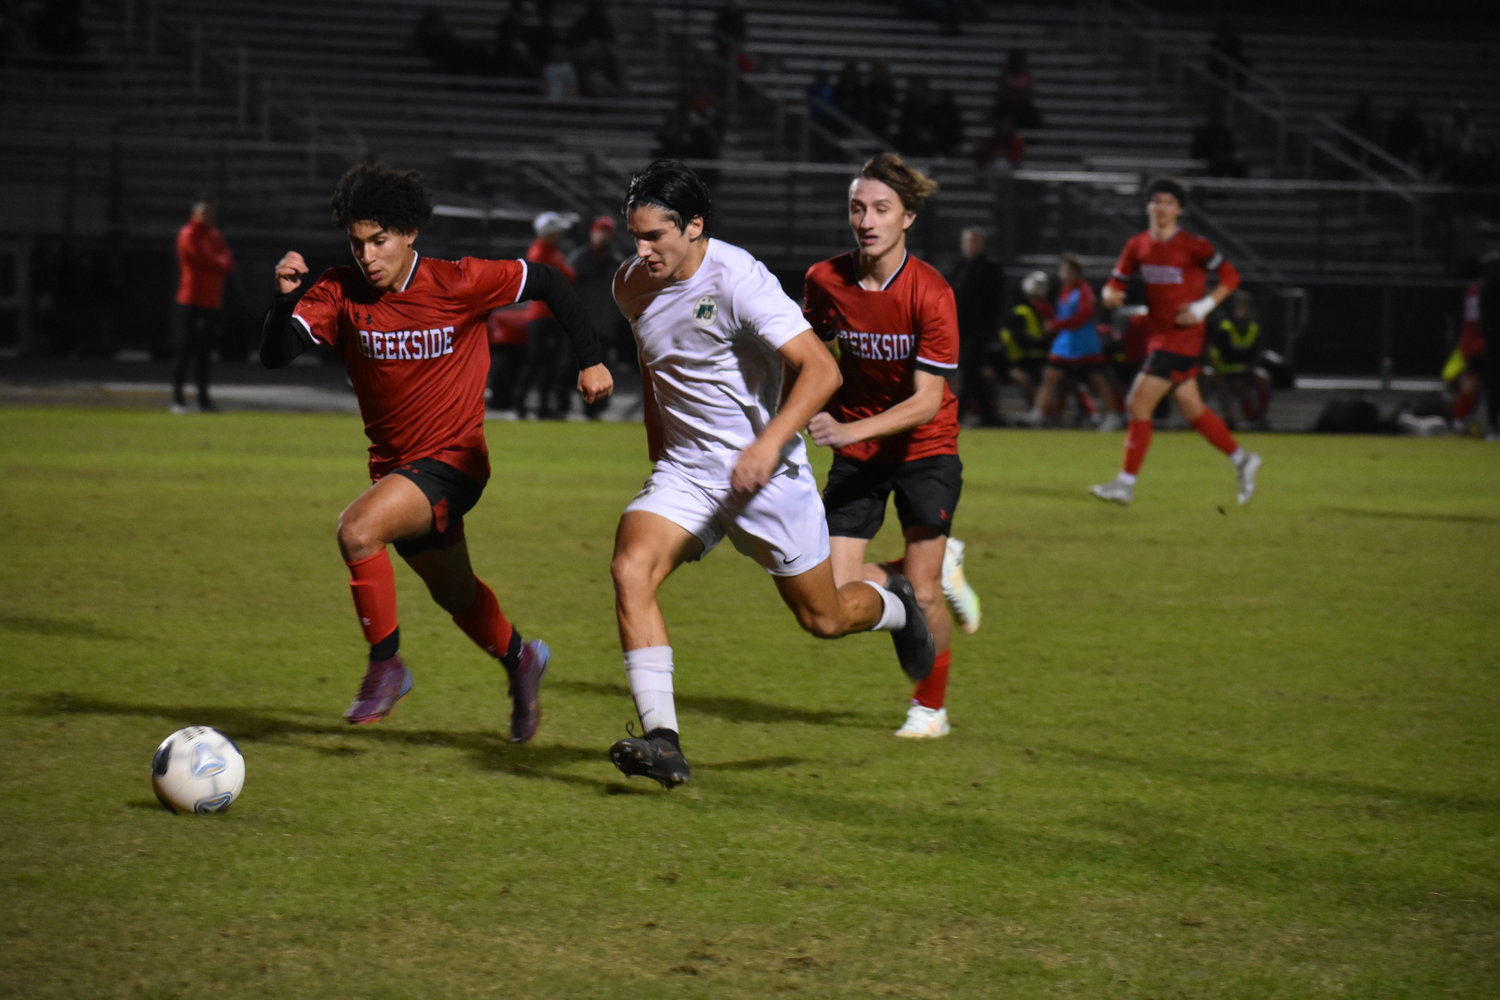 Nease senior Brogan Donnelly slices through a pair of Creekside defenders. He scored both Panthers’ goals on the night.